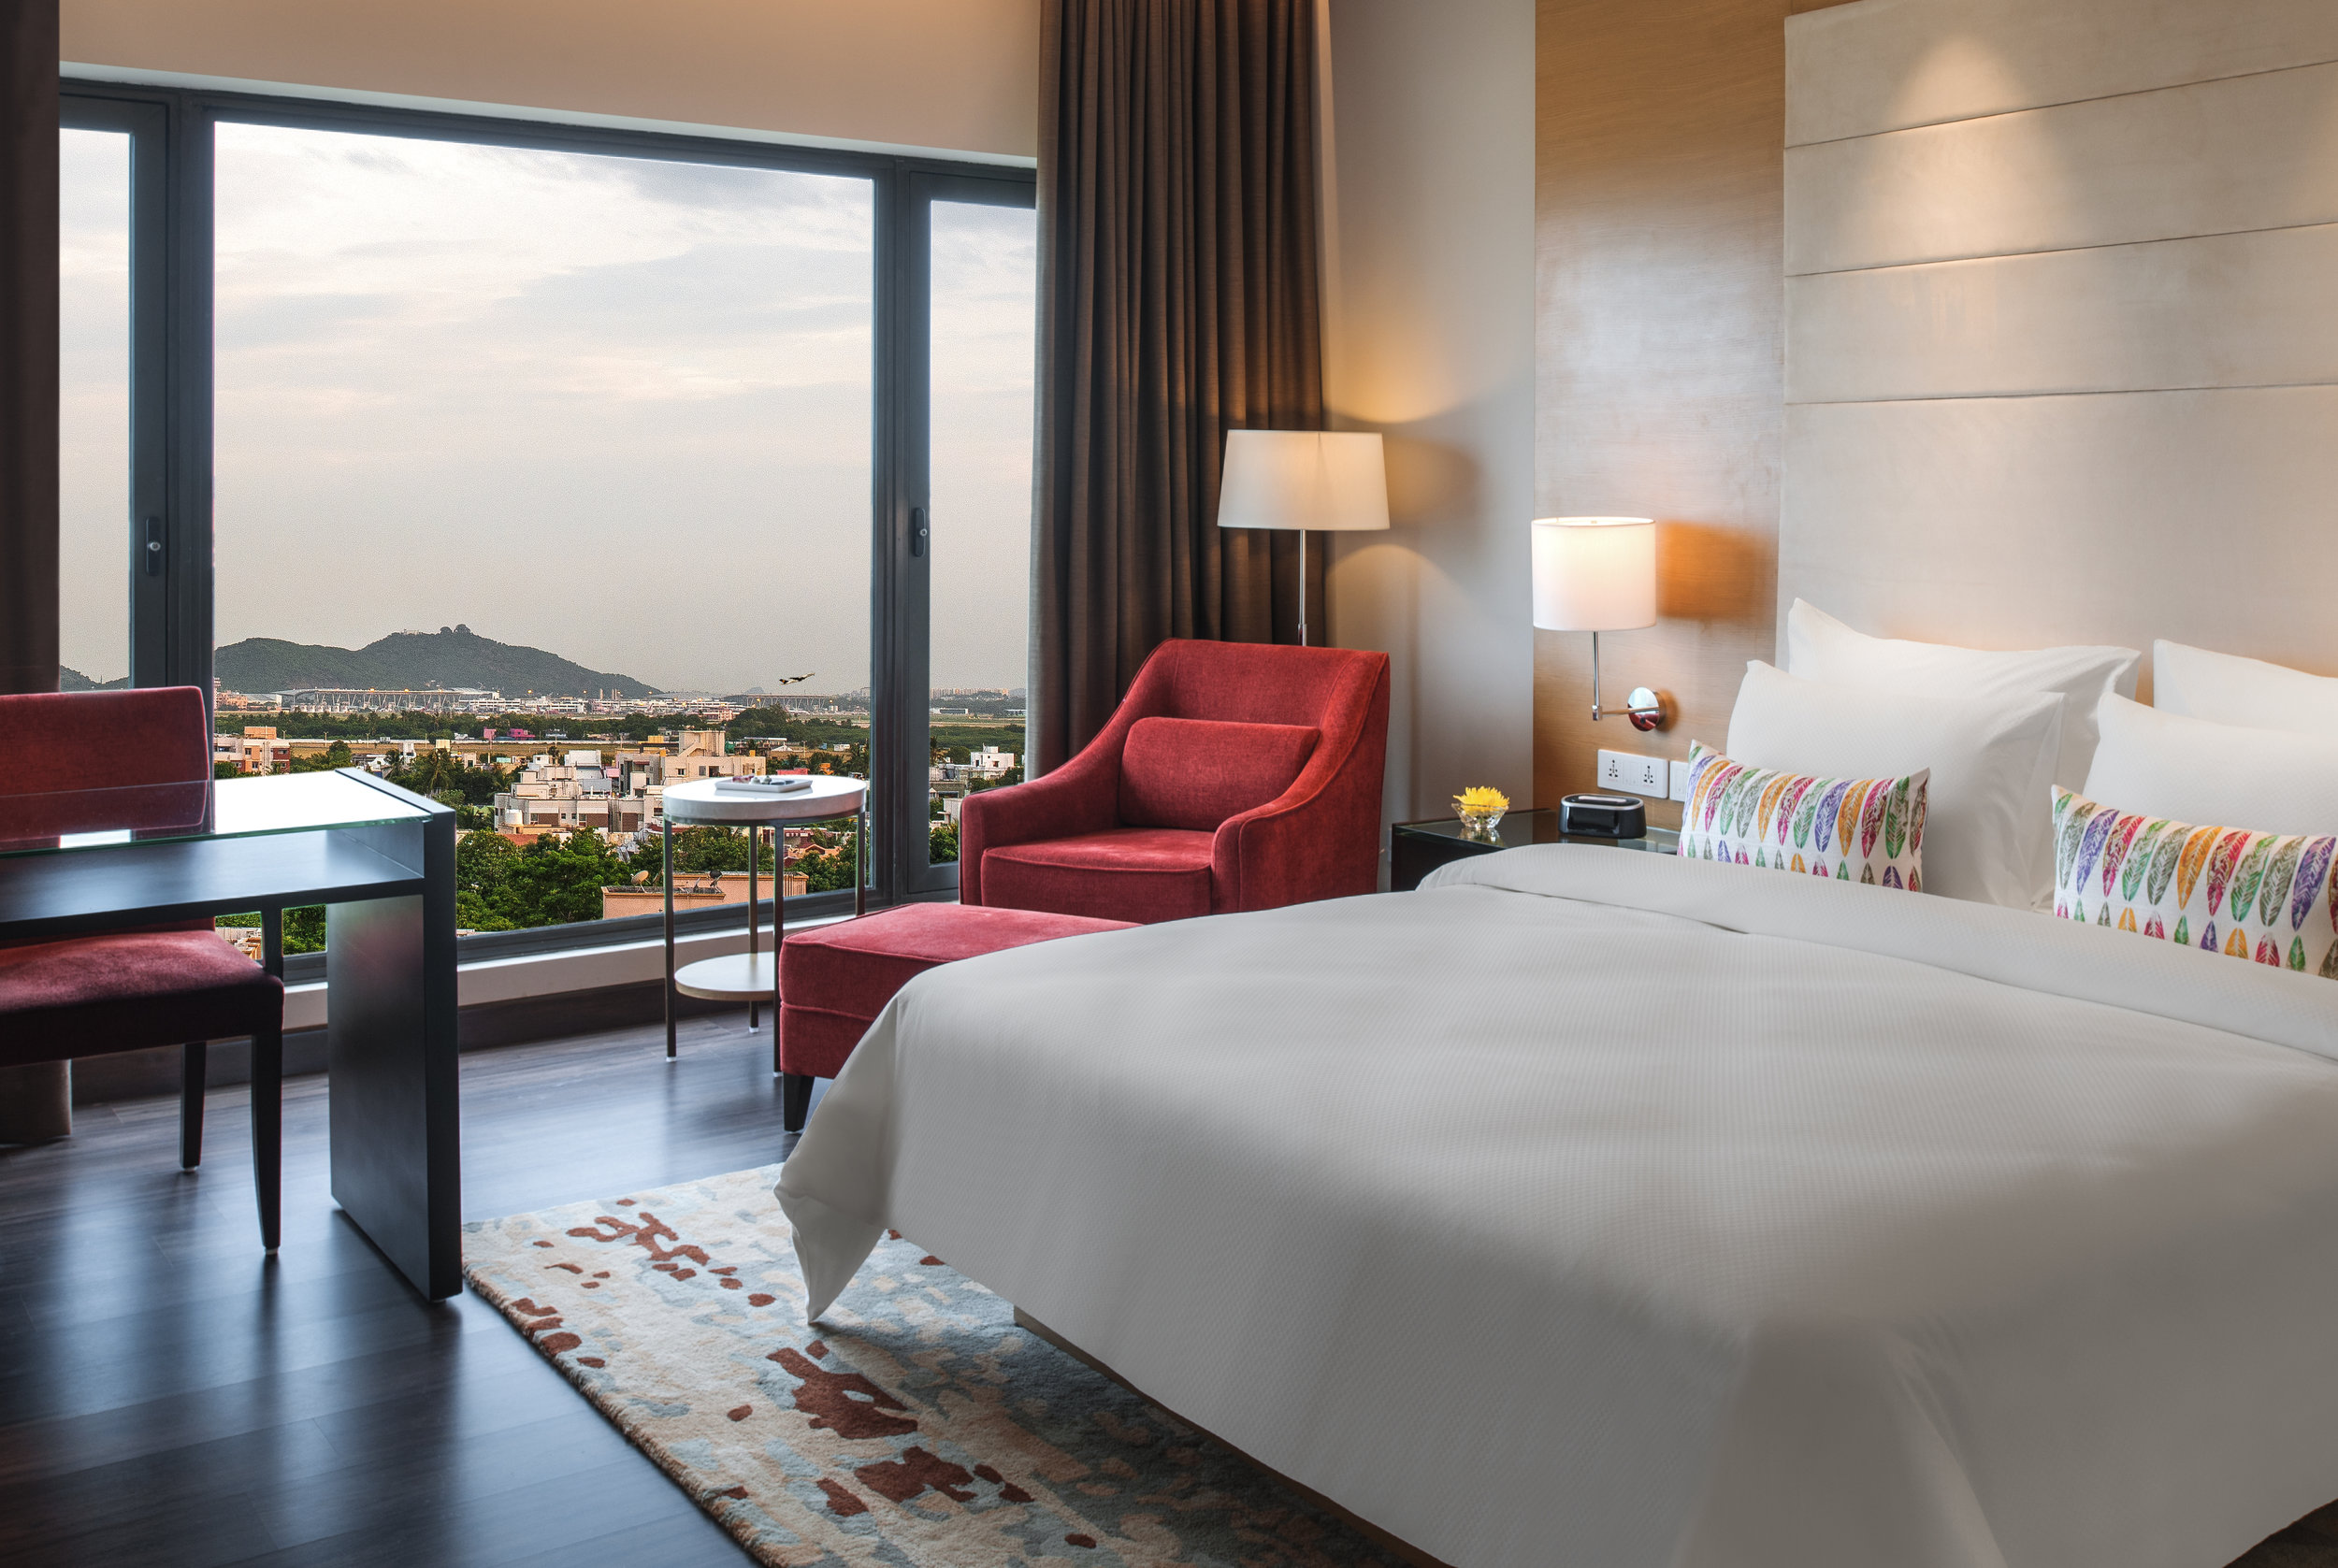 Cobico_Feathers Chennai_Premium room with Airport view.jpg